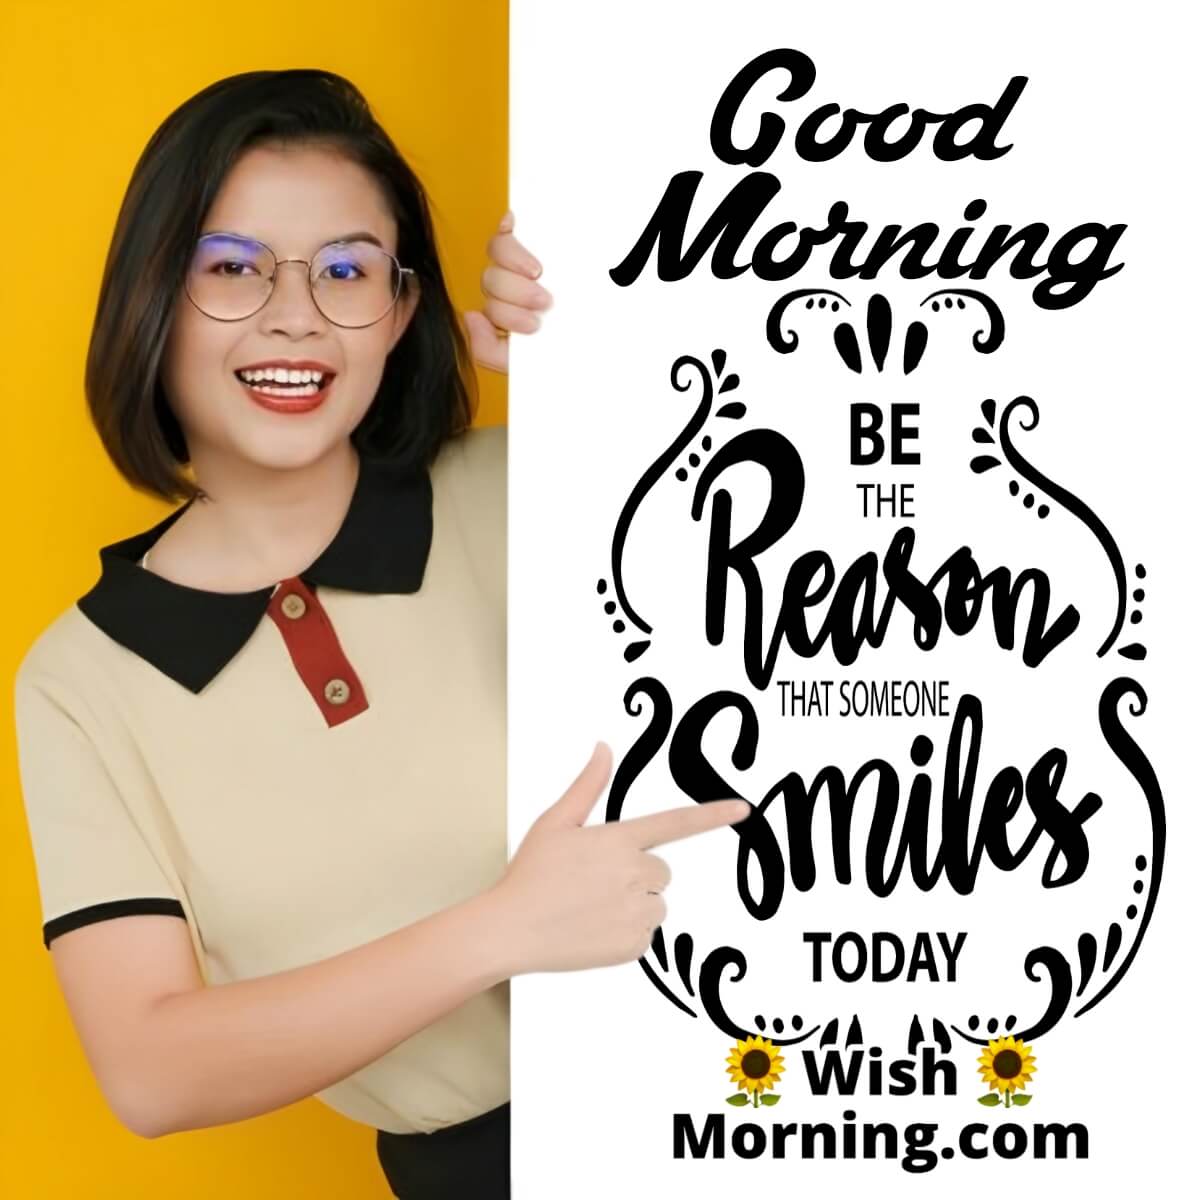 Good Morning Motivational Quote On Smile